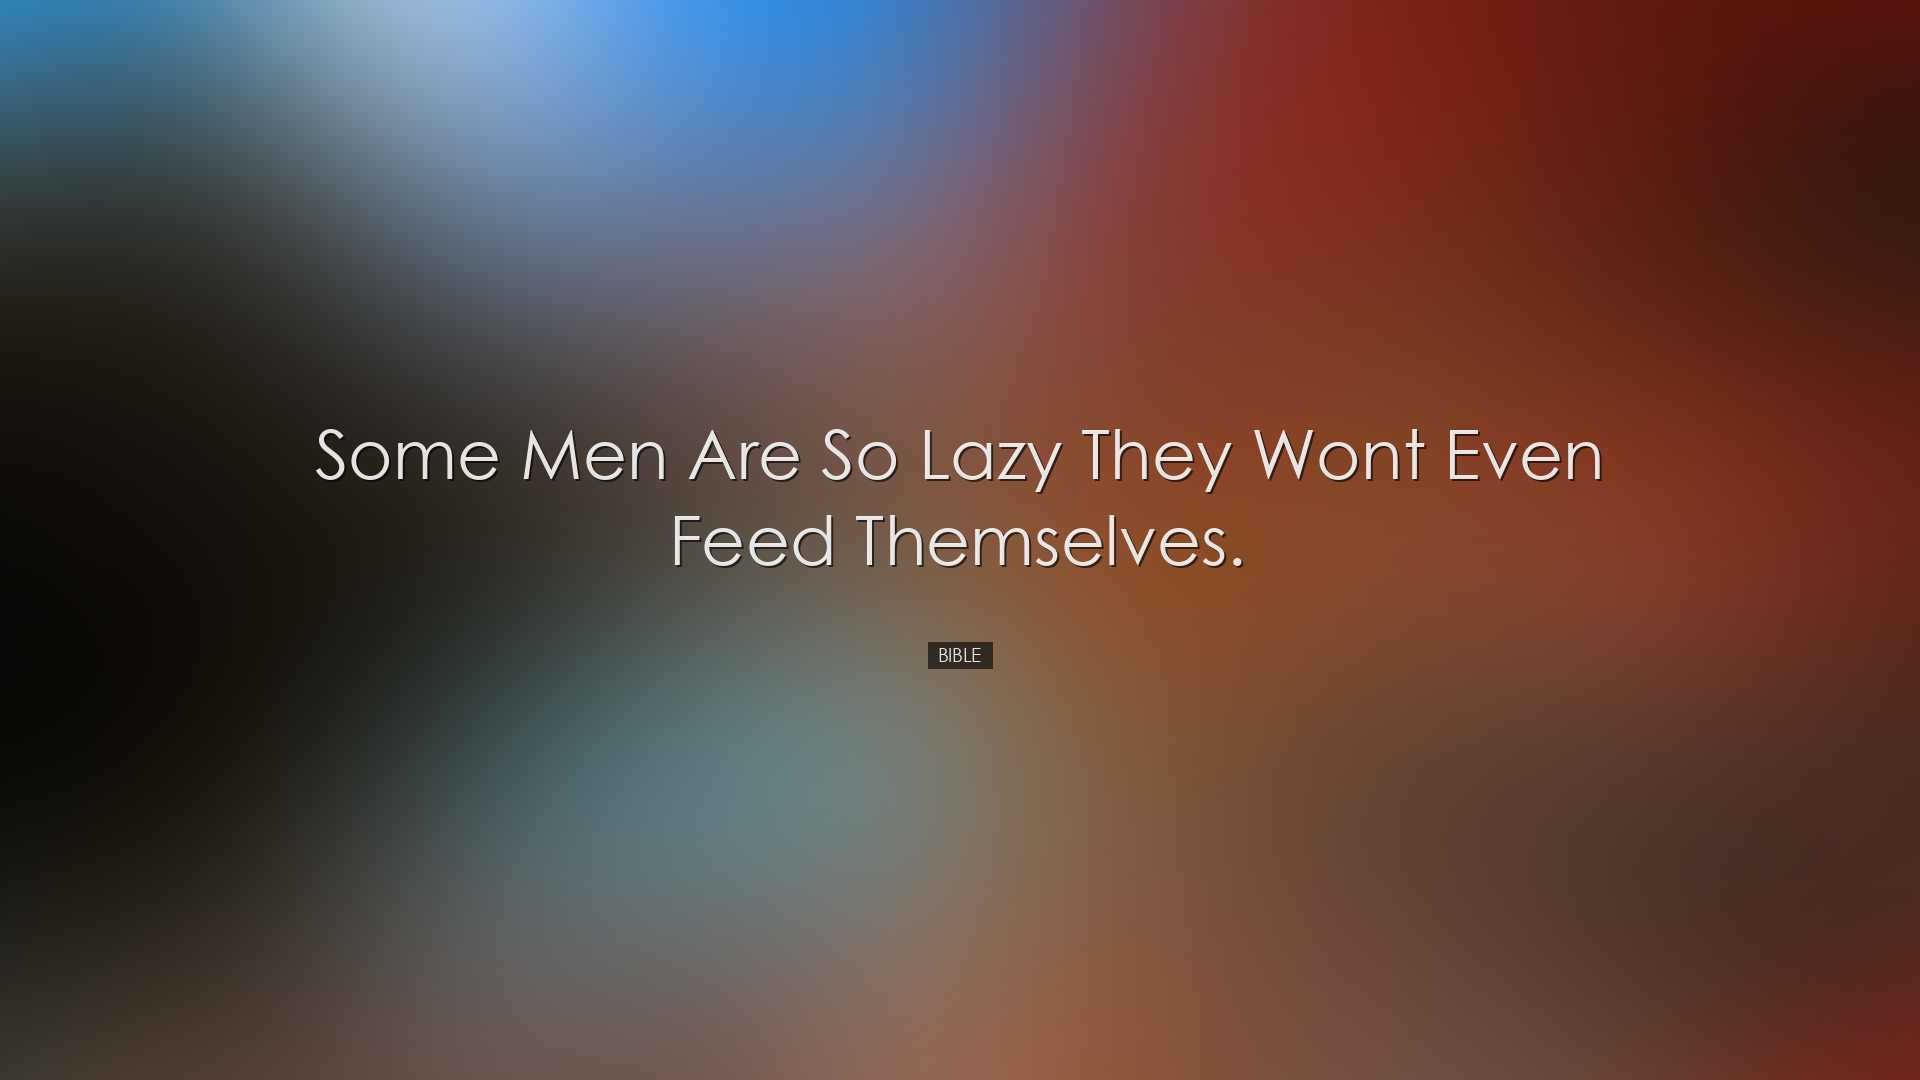 Some men are so lazy they wont even feed themselves. - Bible